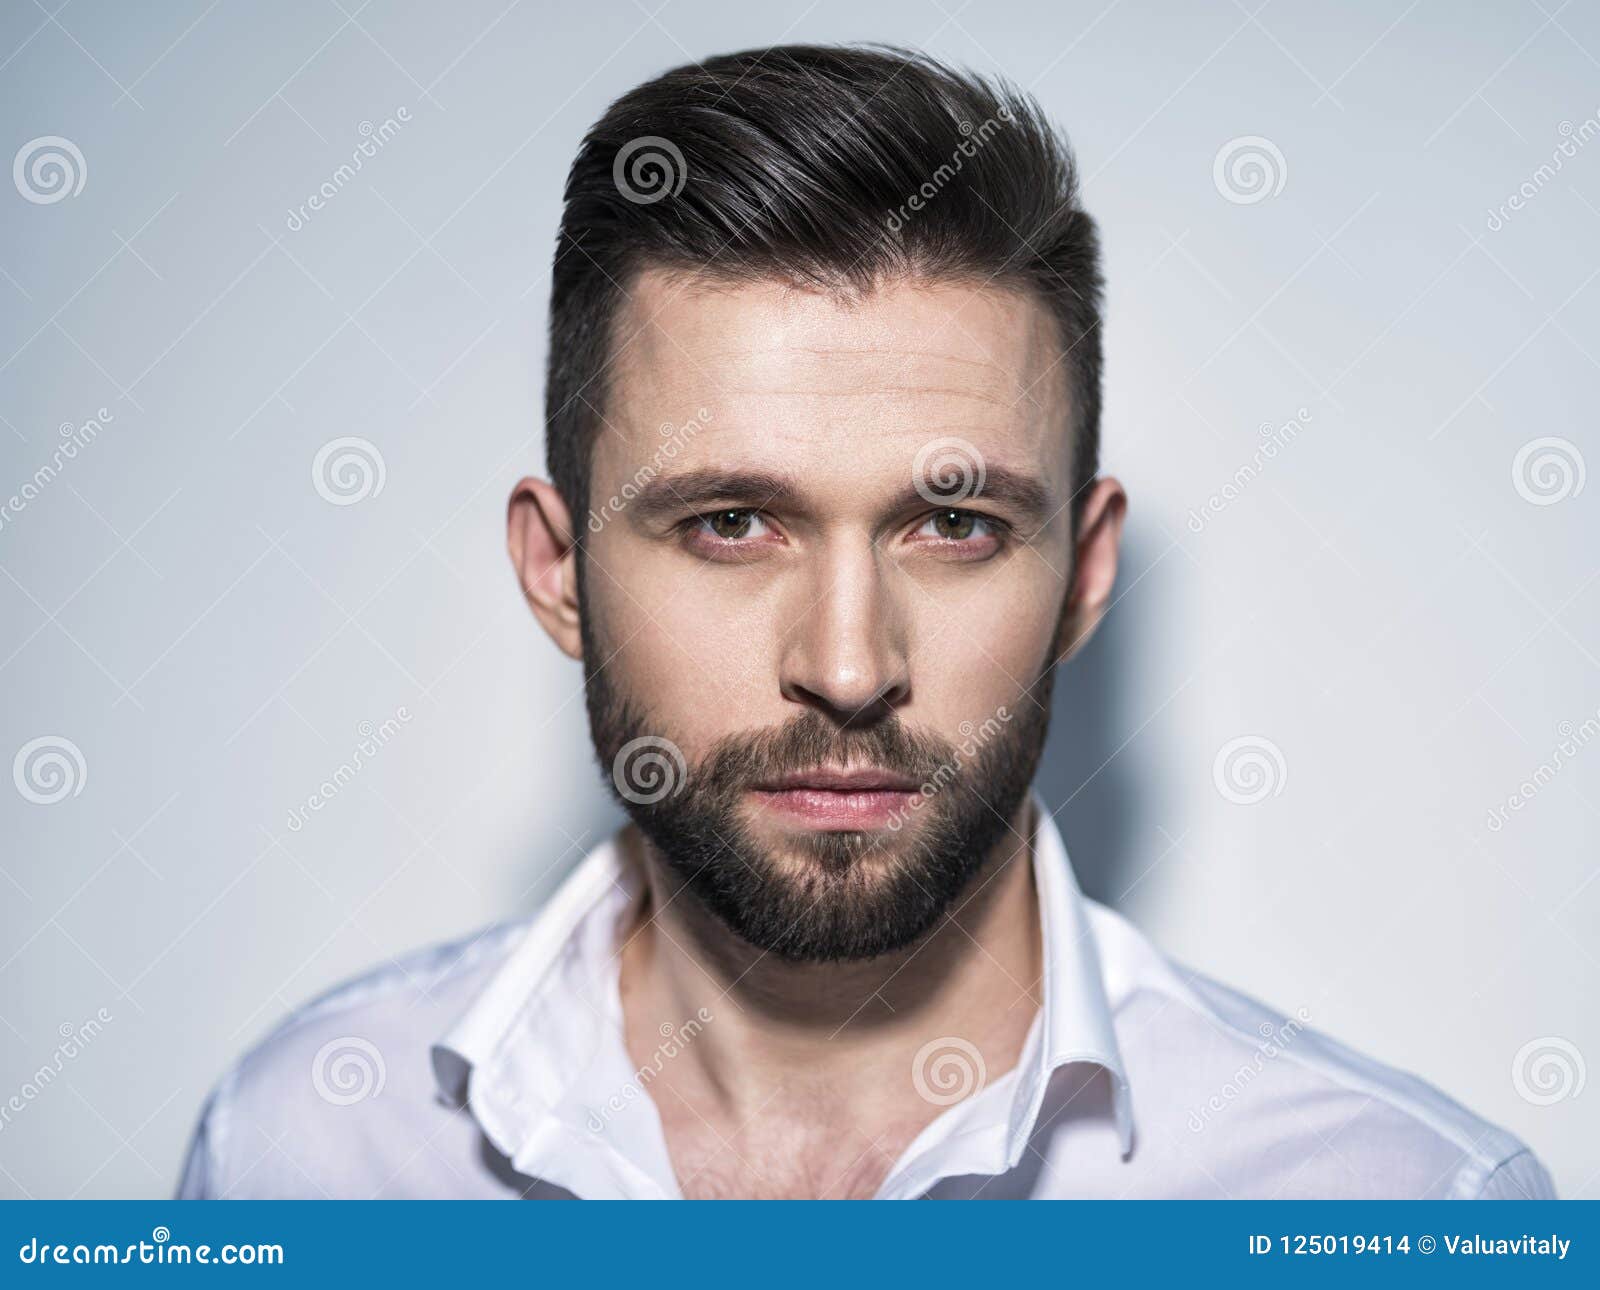 Handsome Man in White Shirt. Closeup Portrait. Stock Photo - Image of ...